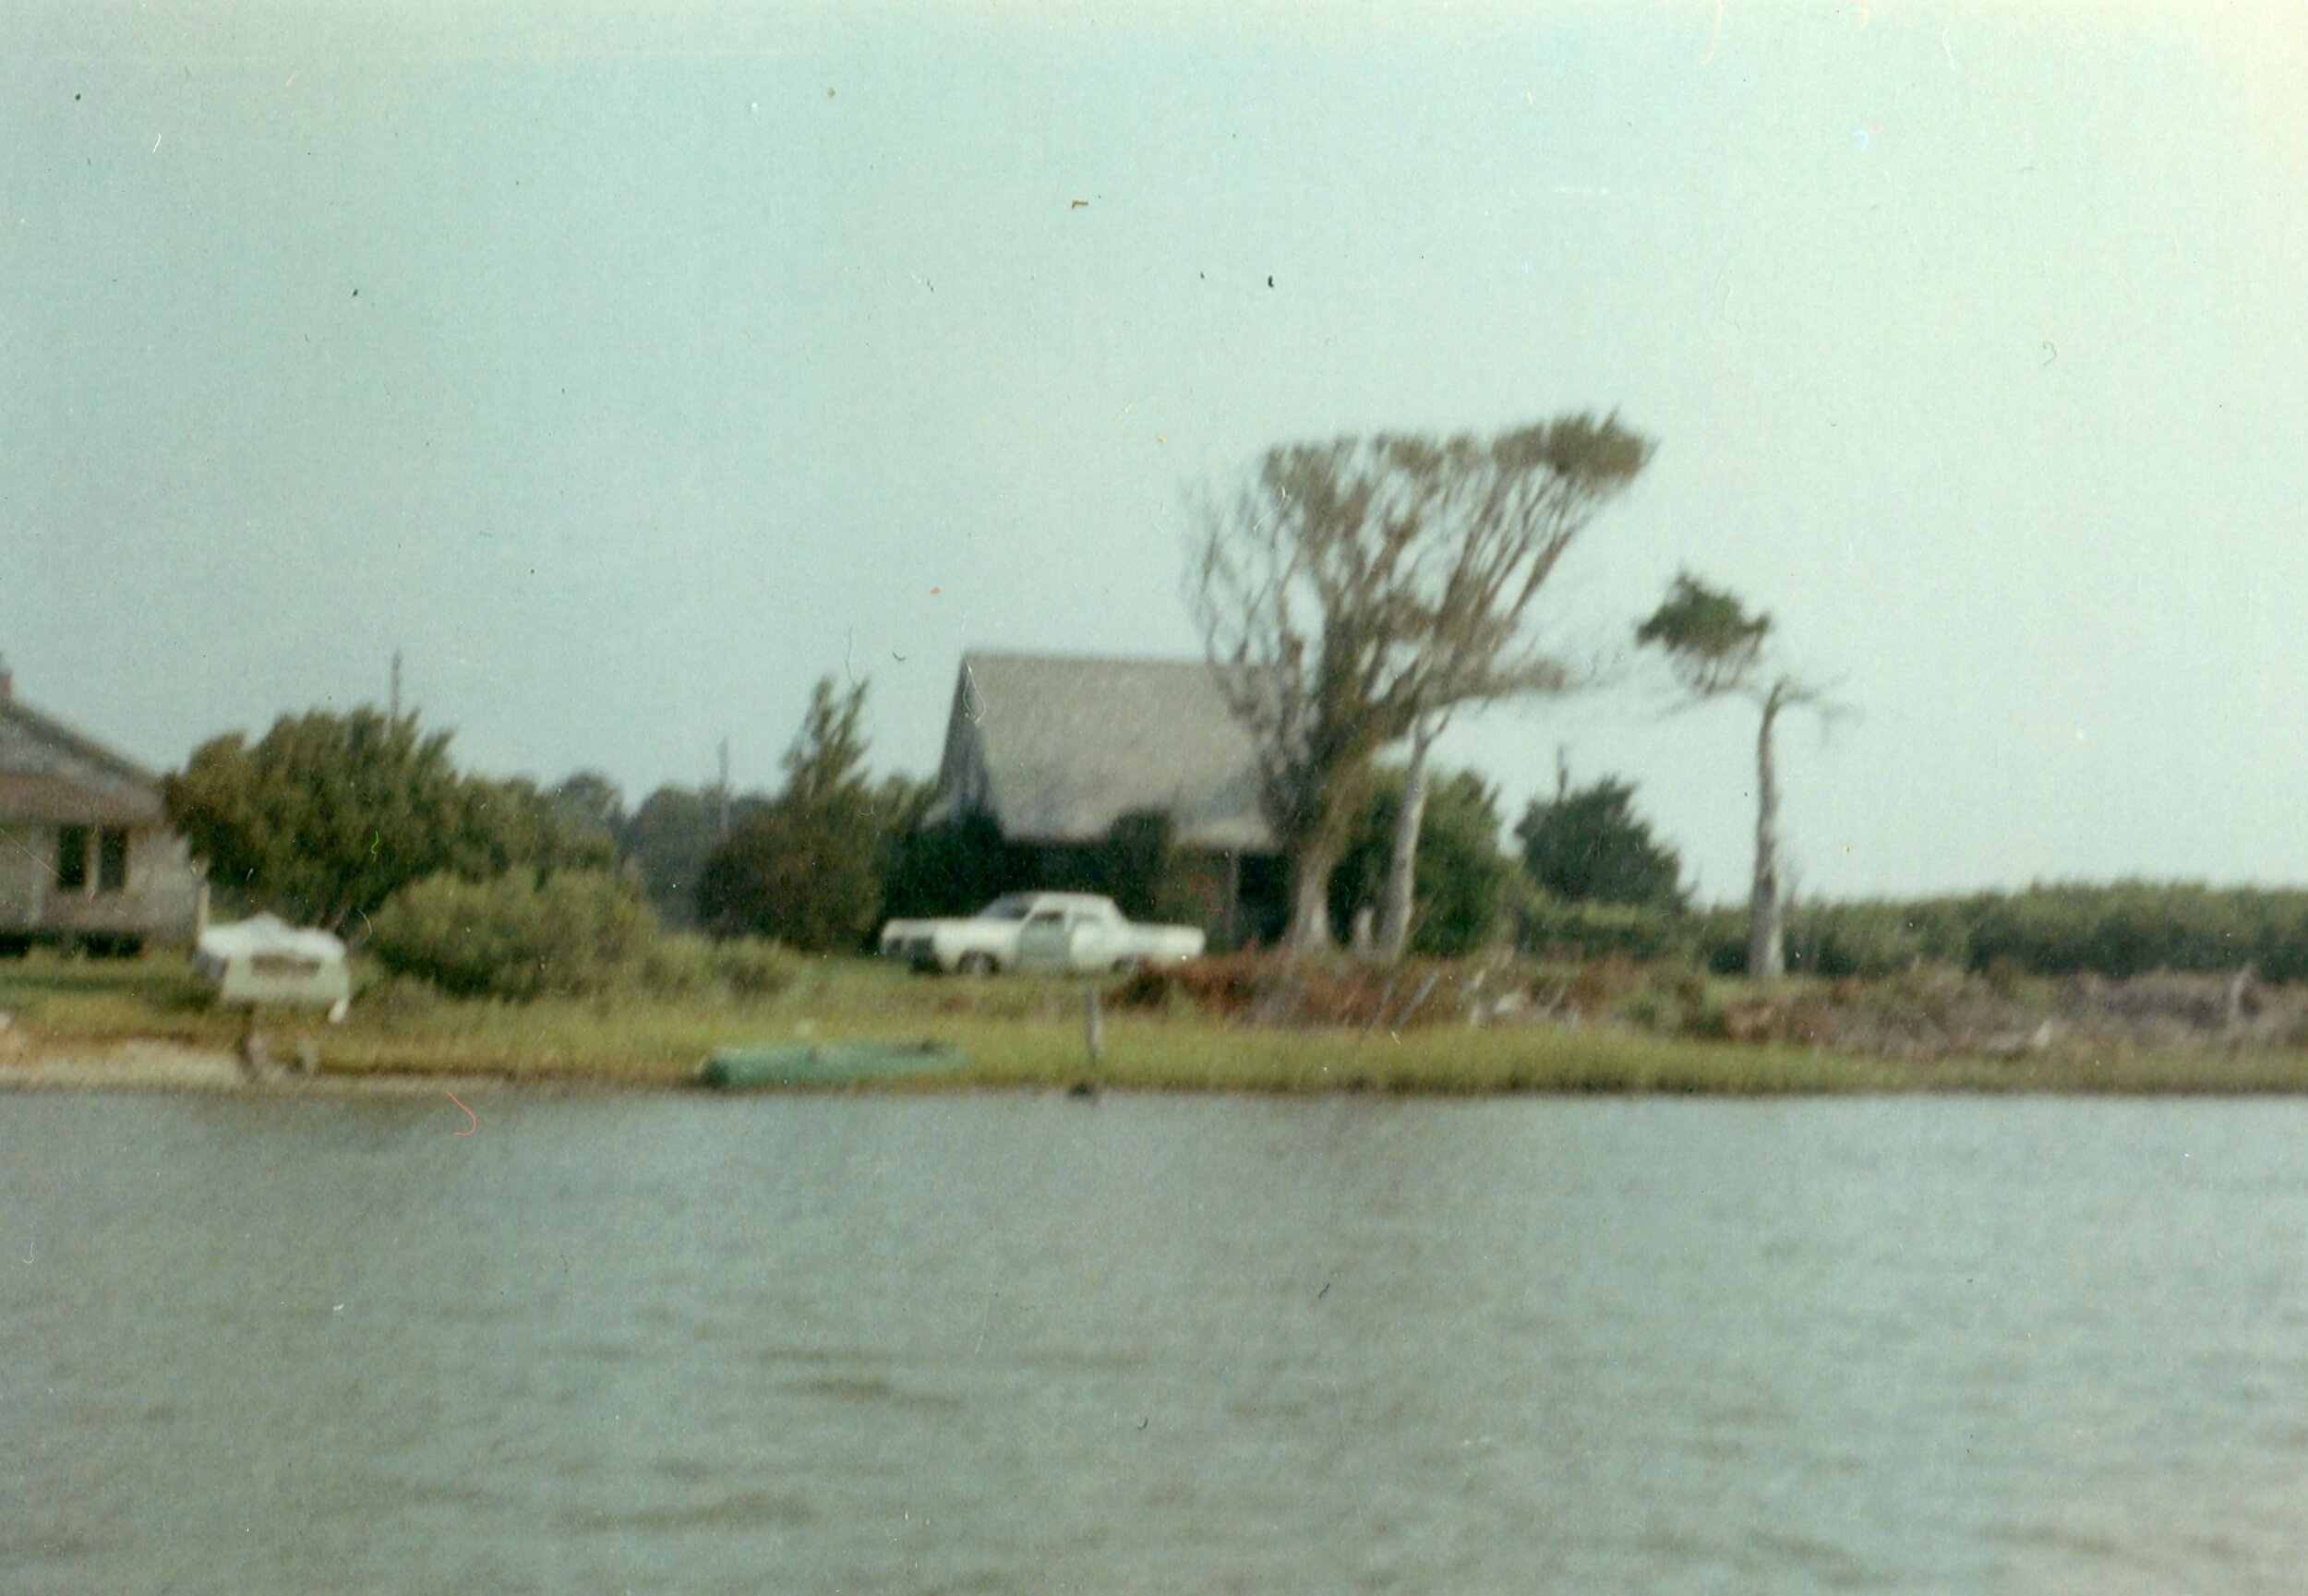 Claude’s house on left–Aunt Gertie’s house on the right